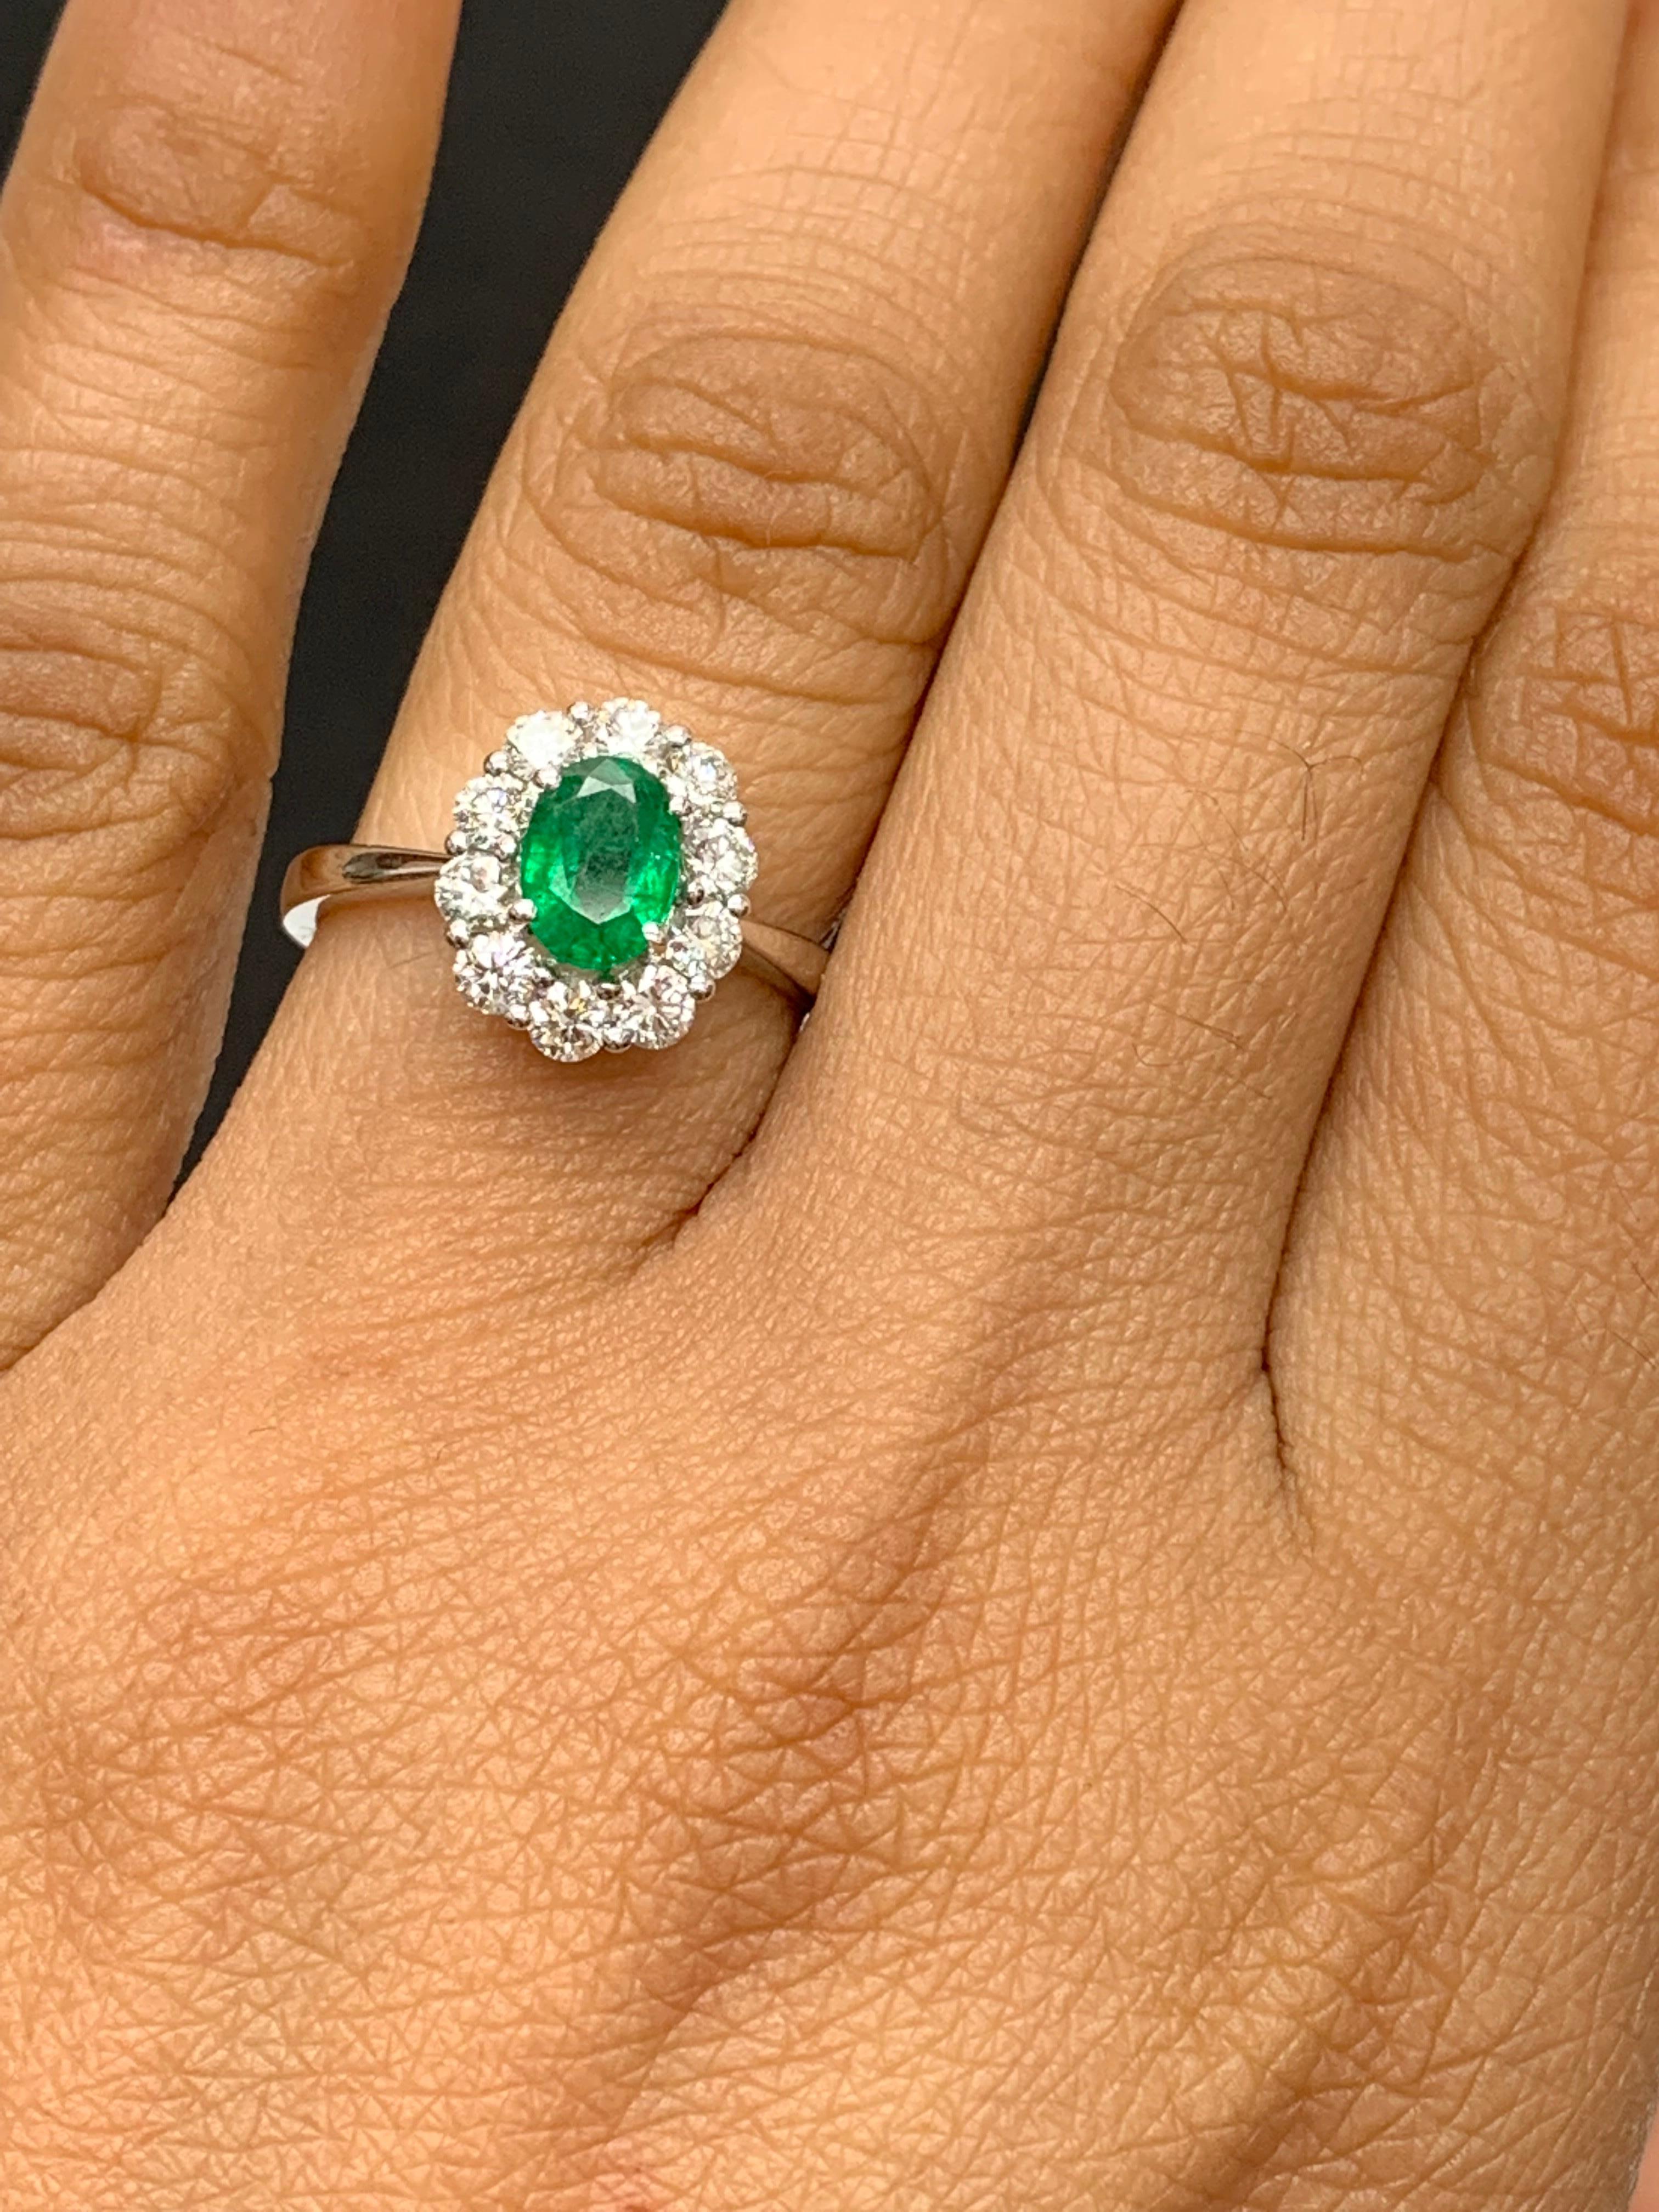 A stunning well-crafted engagement ring showcasing a 0.68-carat oval cut emerald. Flanking the center diamond are perfectly matched brilliant cut 10 diamonds weighing 0.74 carats in total, set in a polished 18K White Gold mounting. Handcrafted in